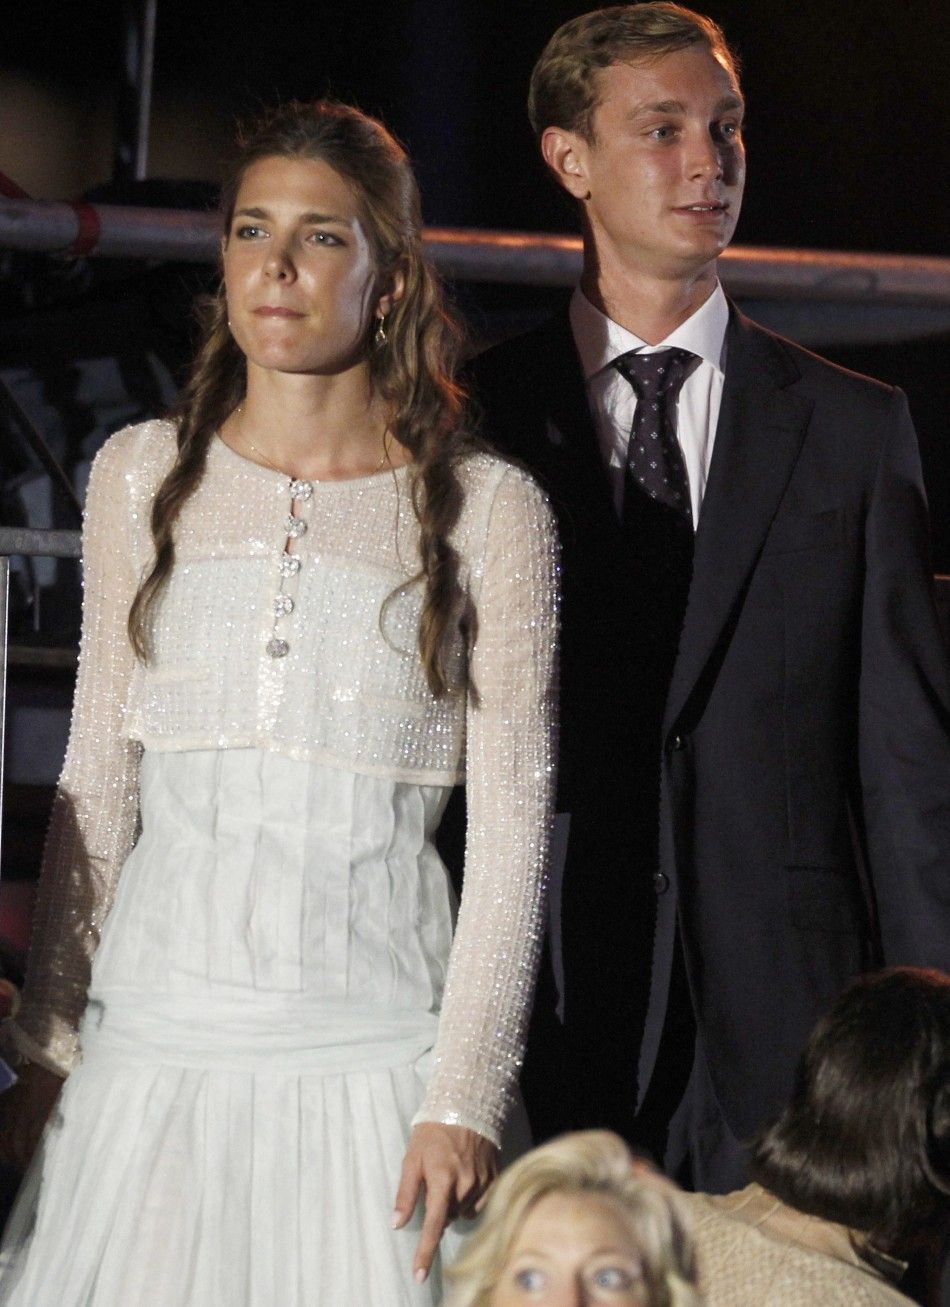  Charlotte Casiraghi and her brother Pierre attend a concert by French composer and musician Jean-Michel Jarre in the Harbour of Monaco